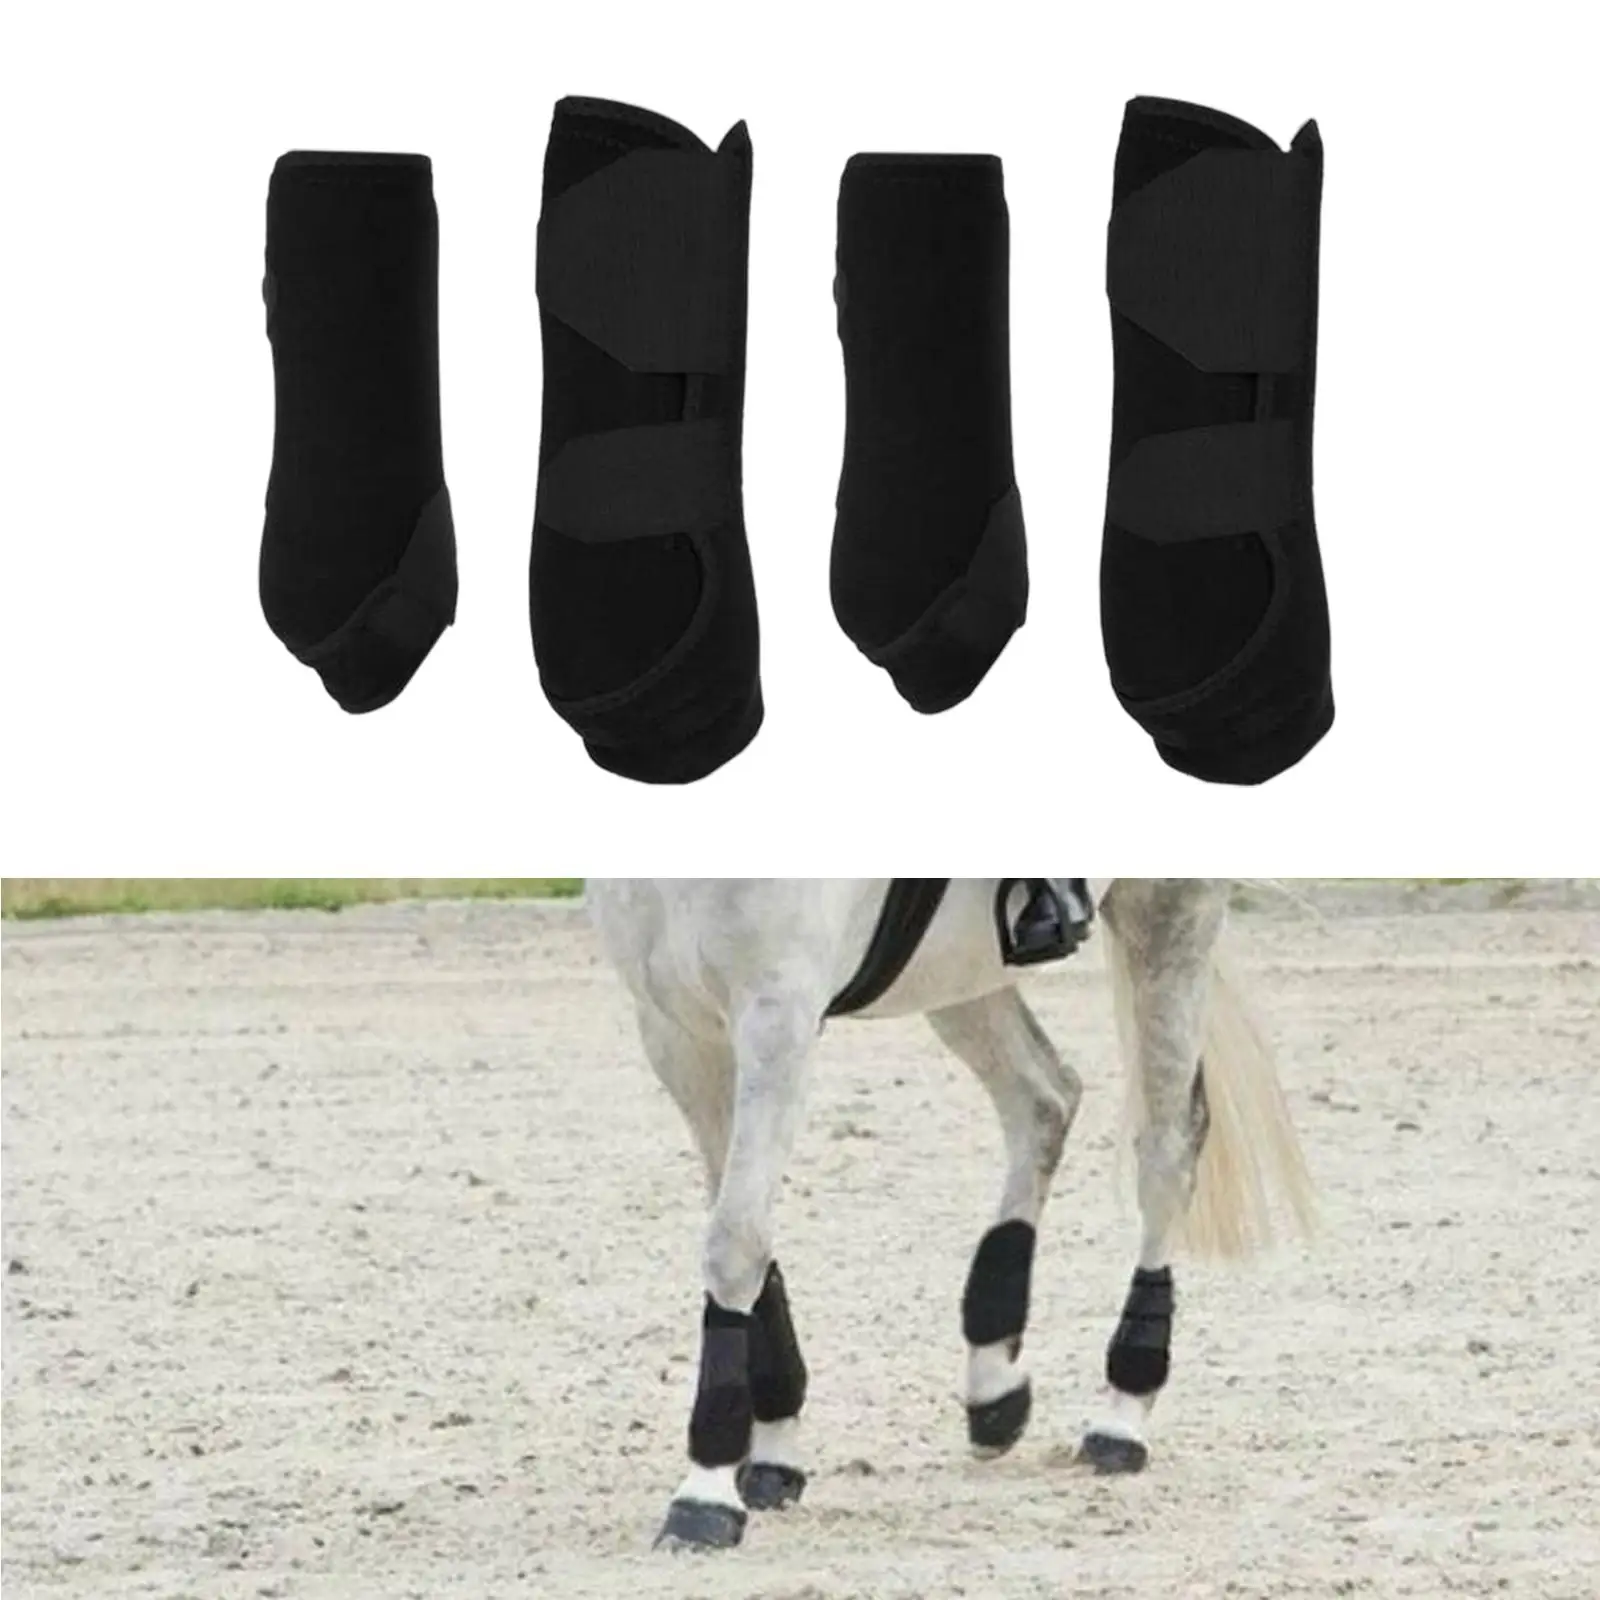 4x Horse Boots Leg Protection Wraps Shock Absorbing, Front Hind Legs Guard for Jumping Training Riding Equestrian Equipment